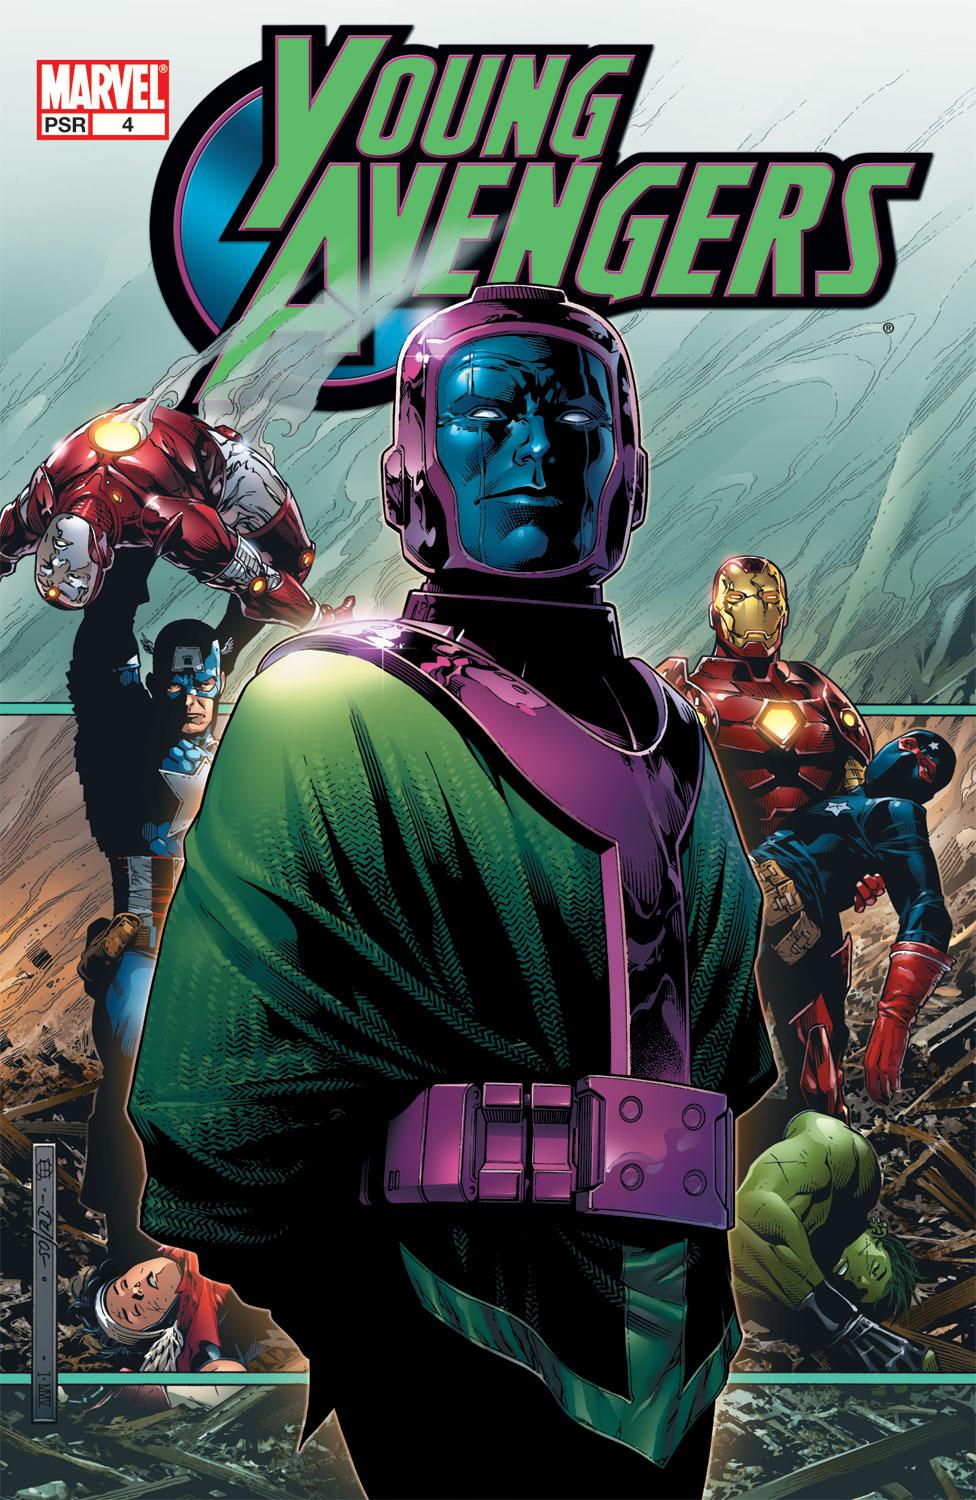 Young Avengers (2005) #4